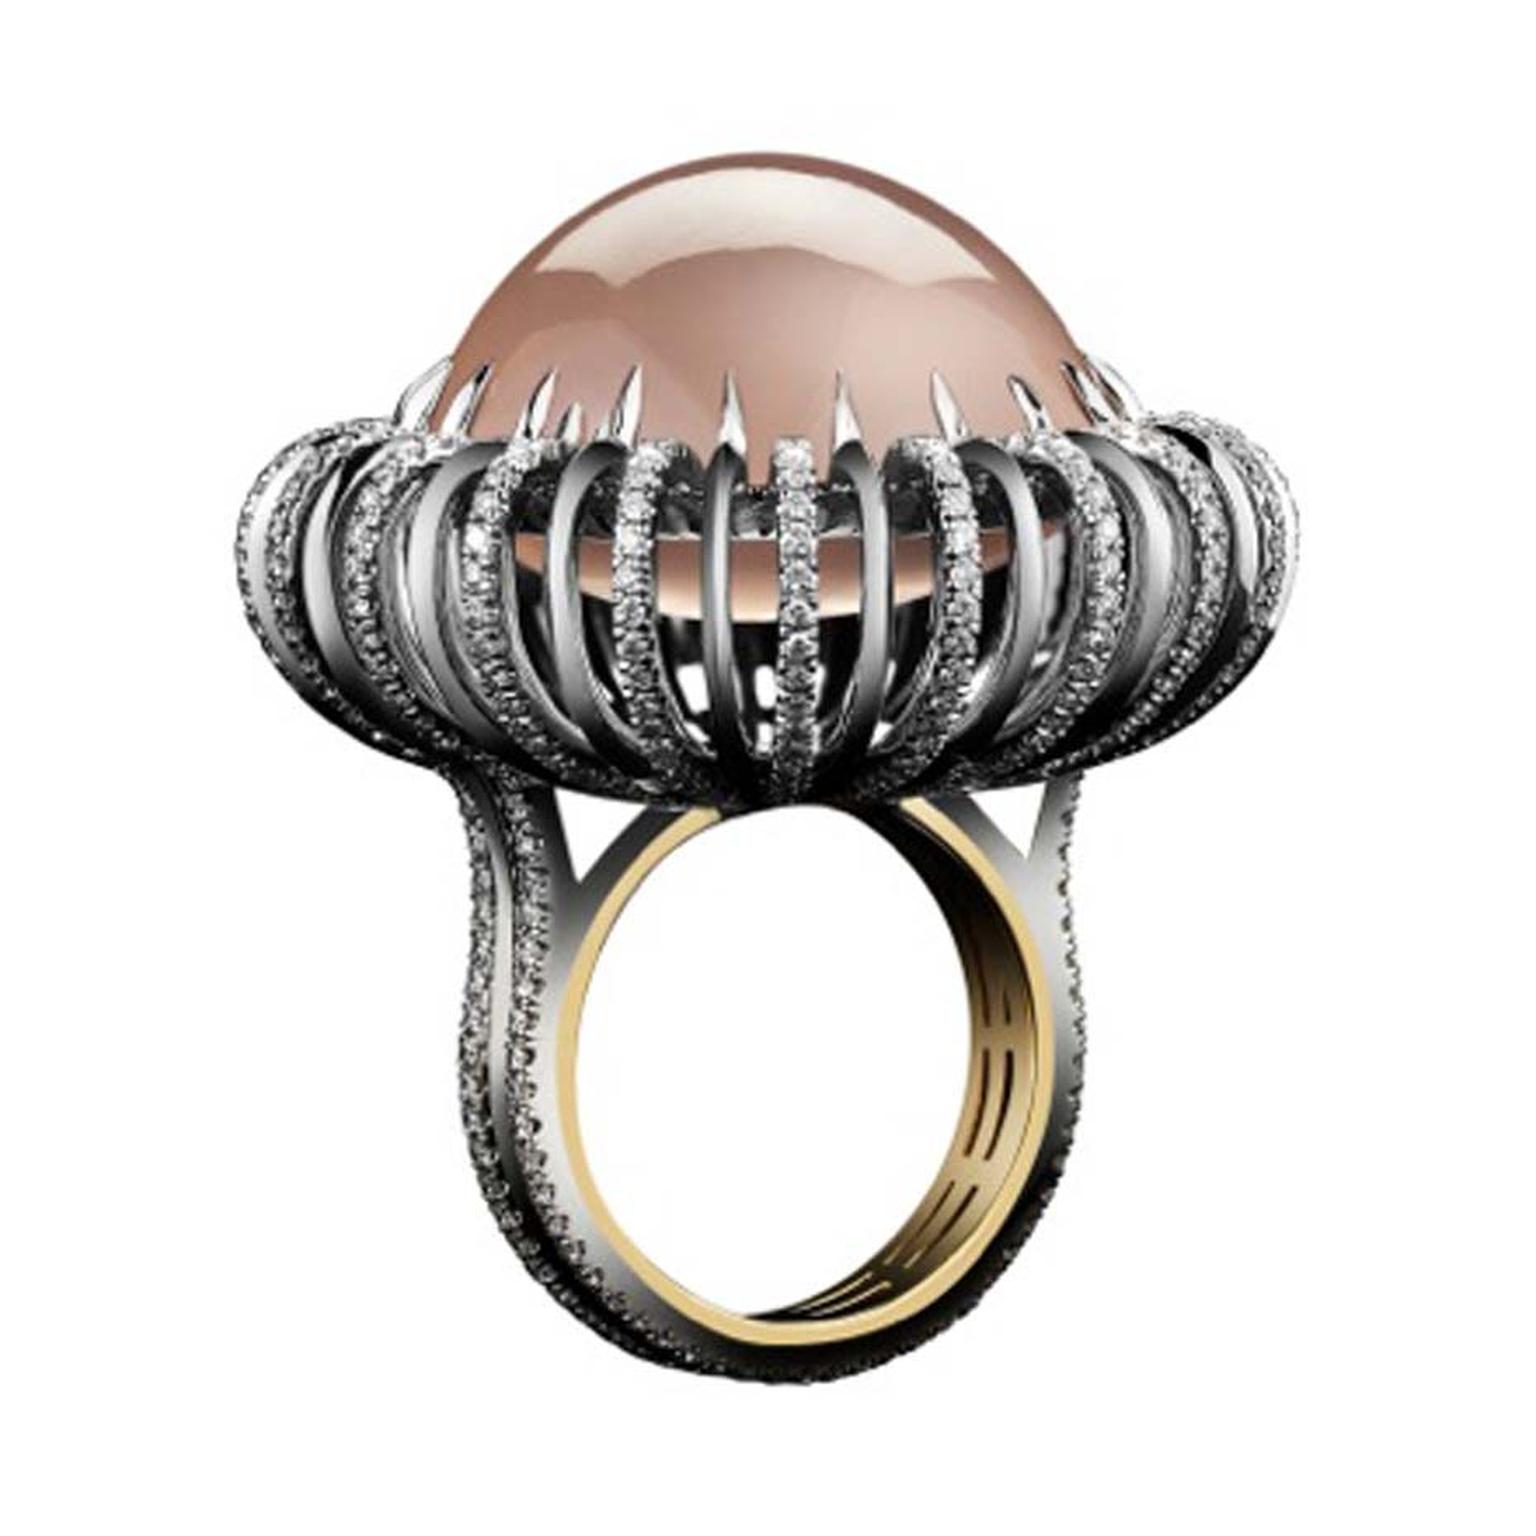 Alexandra Mor rose quartz cabochon orb ring surrounded by a melee of diamonds which create a powerful contrast to the pale quartz centre.